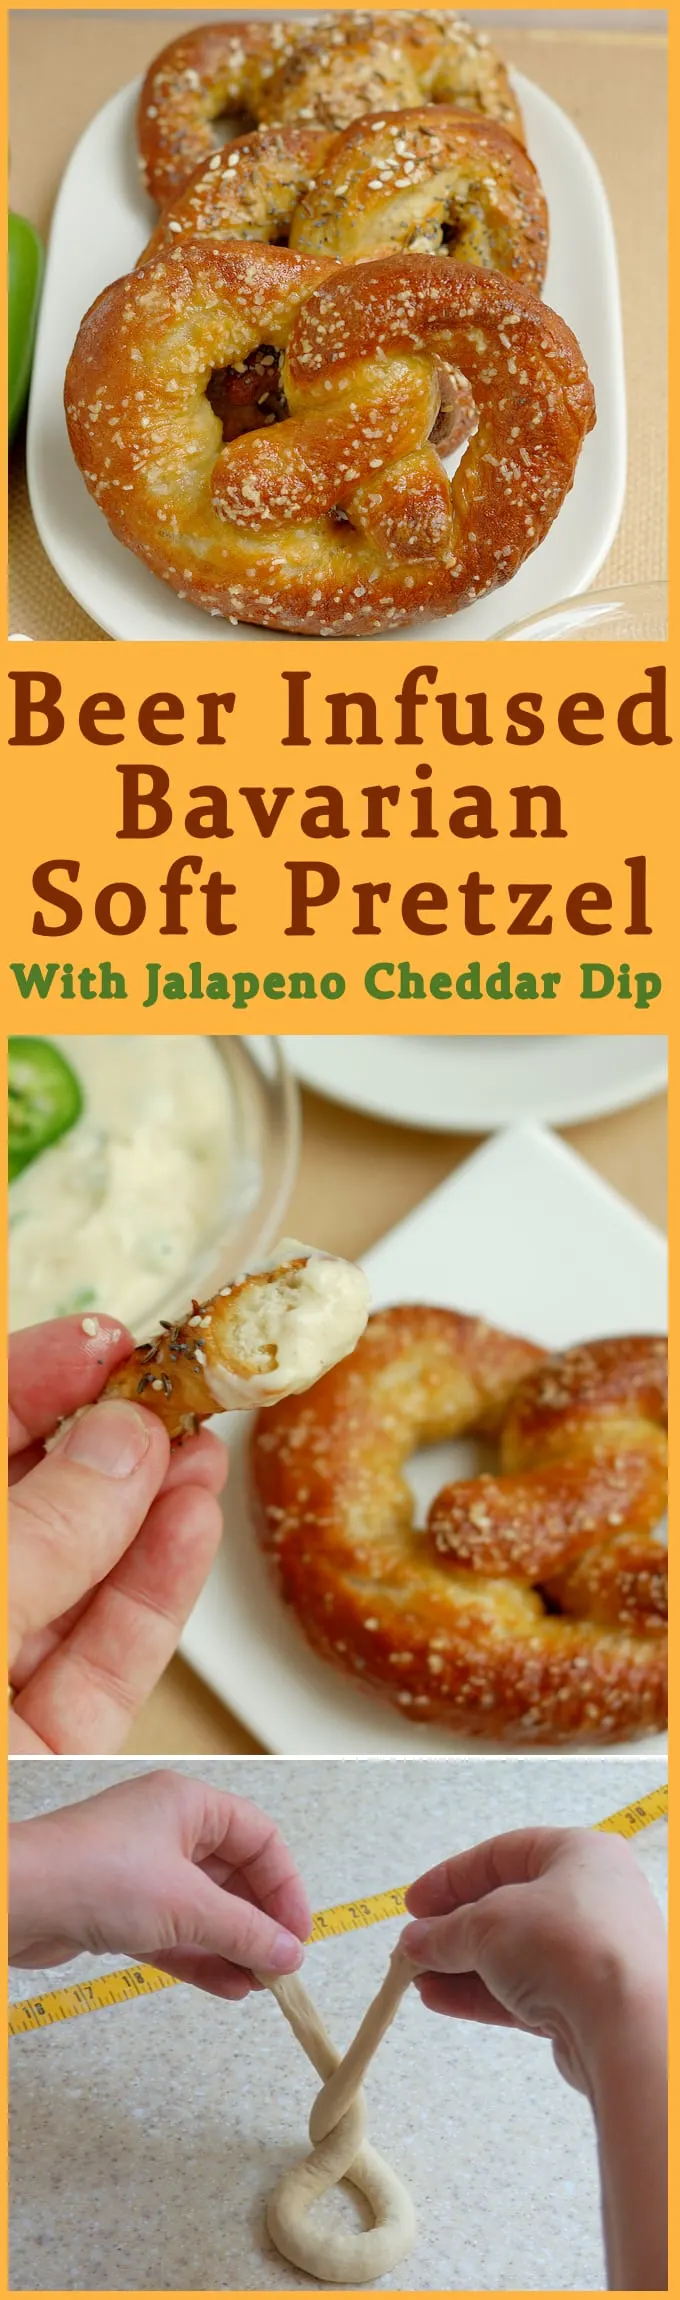 Beer is delicious with a pretzel and in a pretzel. Easy to make and so delicious. Get the recipe and see photos how to shape and bake your own soft pretzels